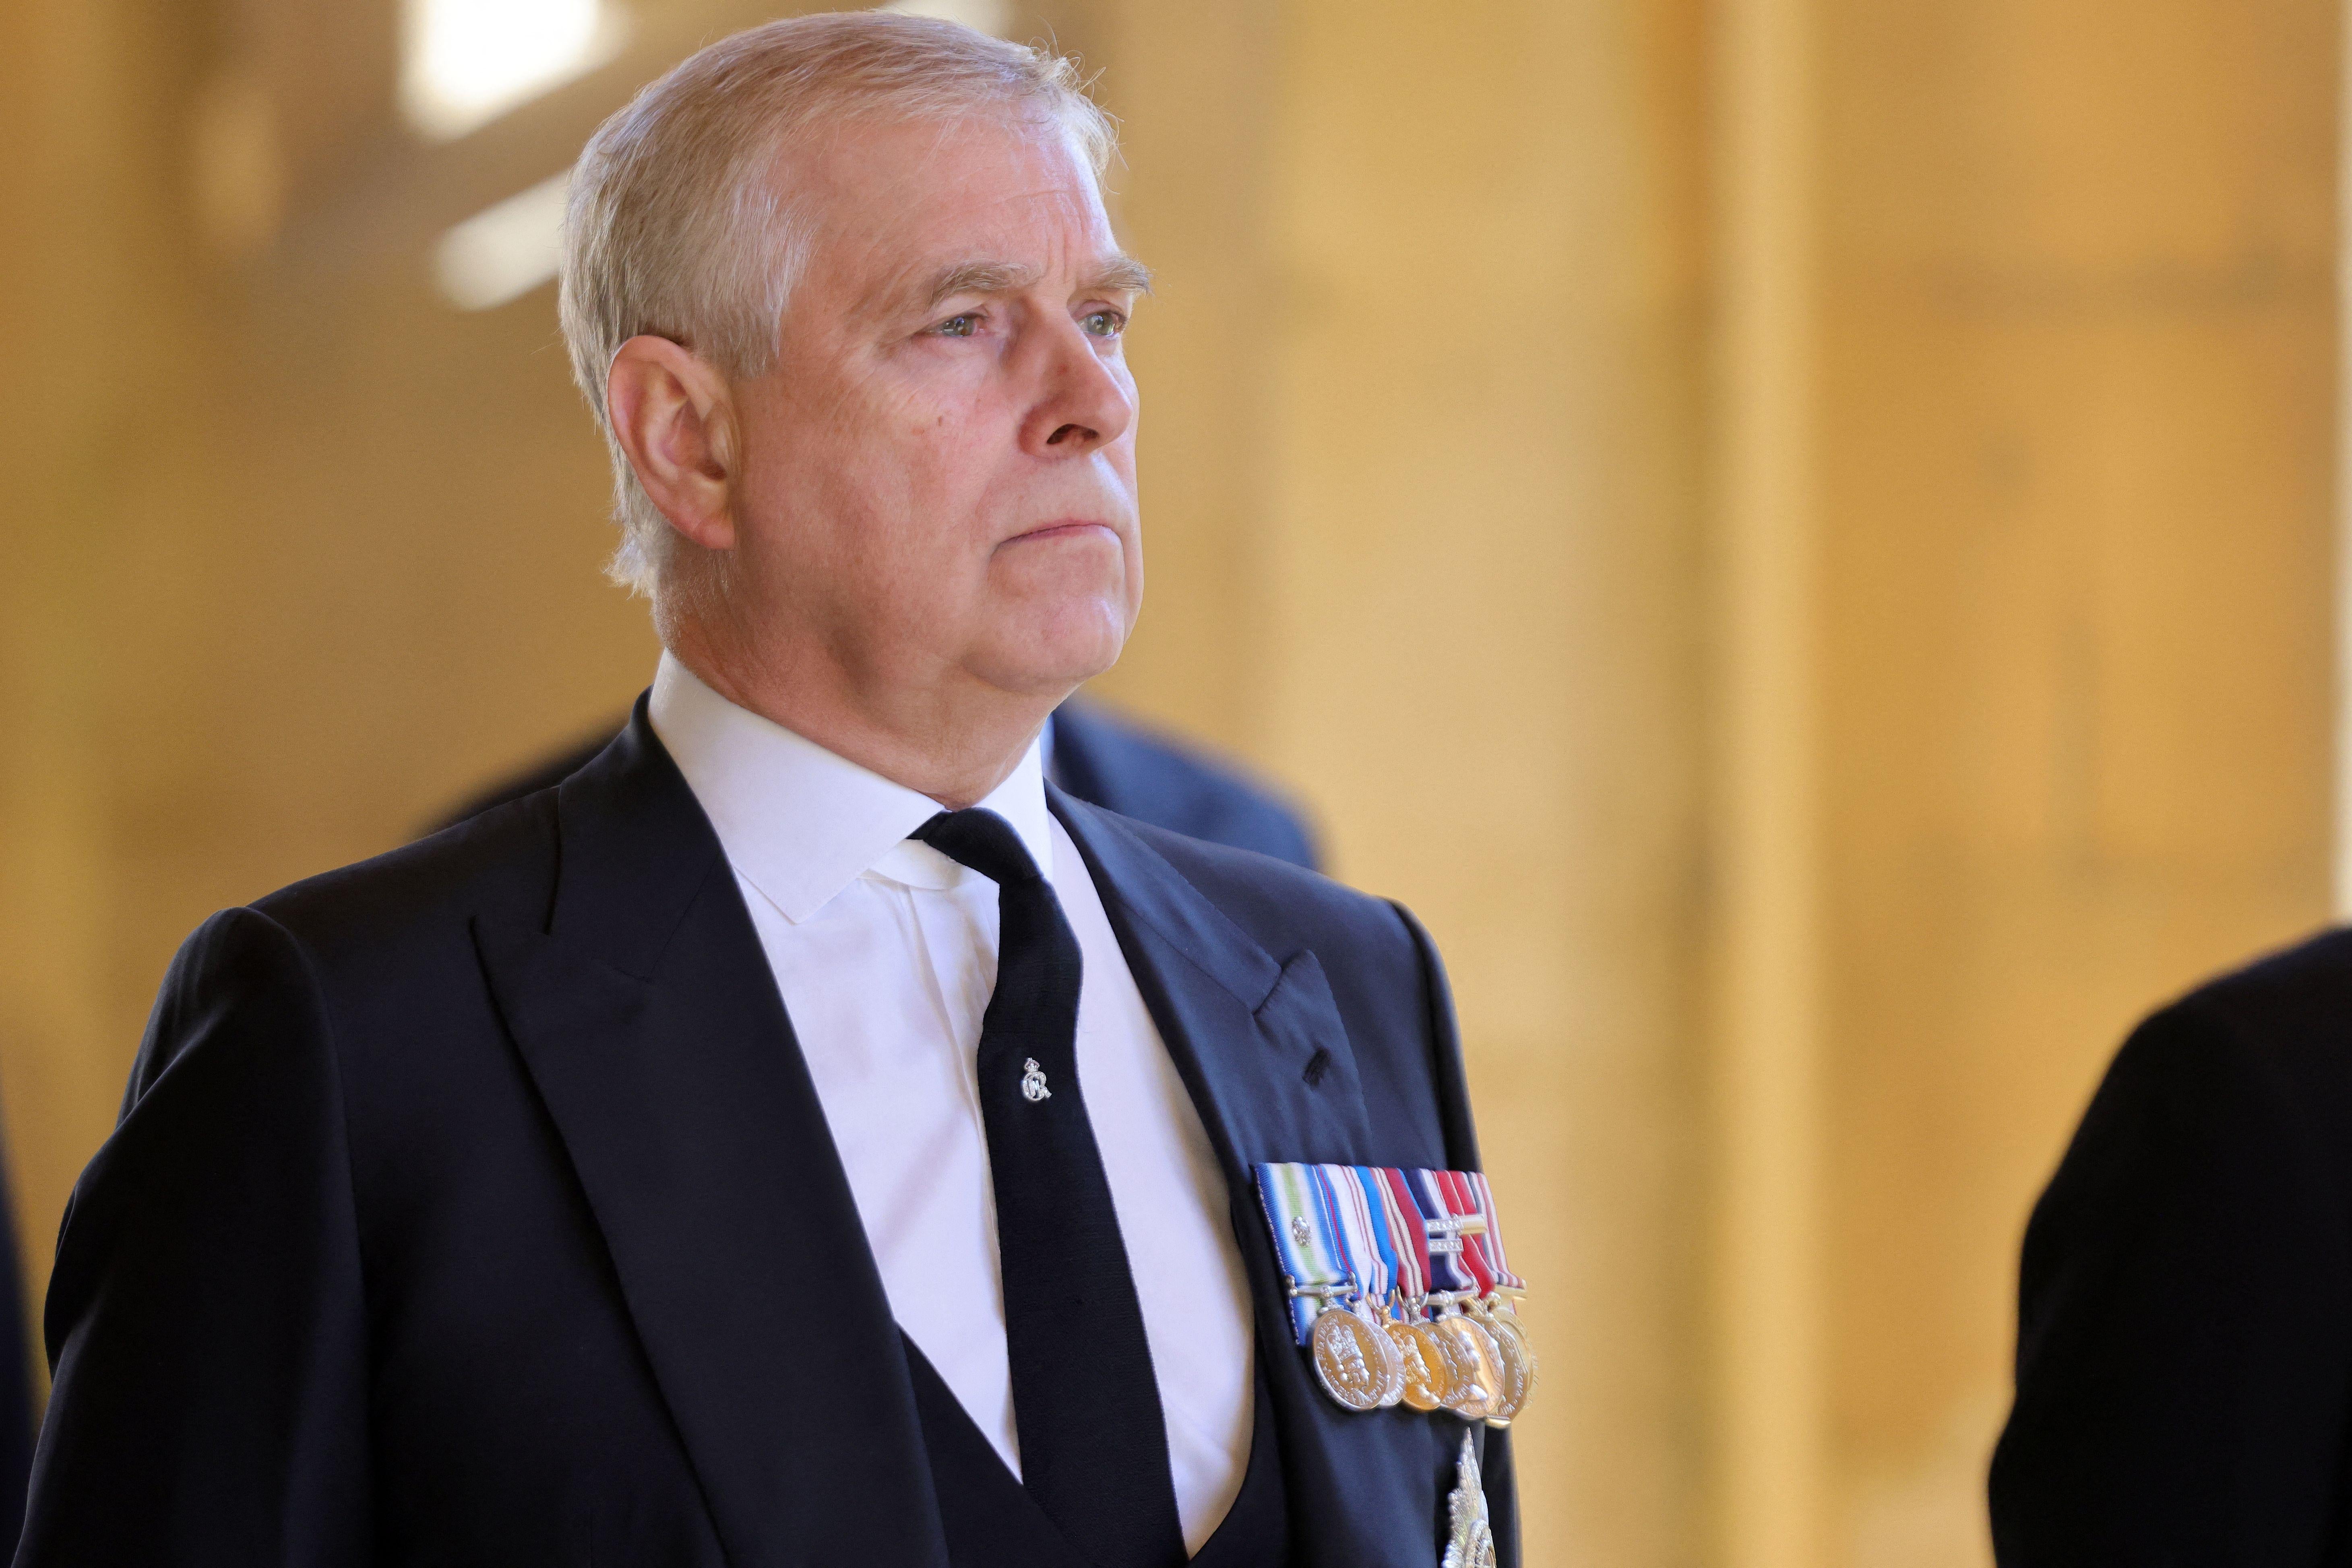 Prince Andrew in a black suit with medals pinned to the lapel.